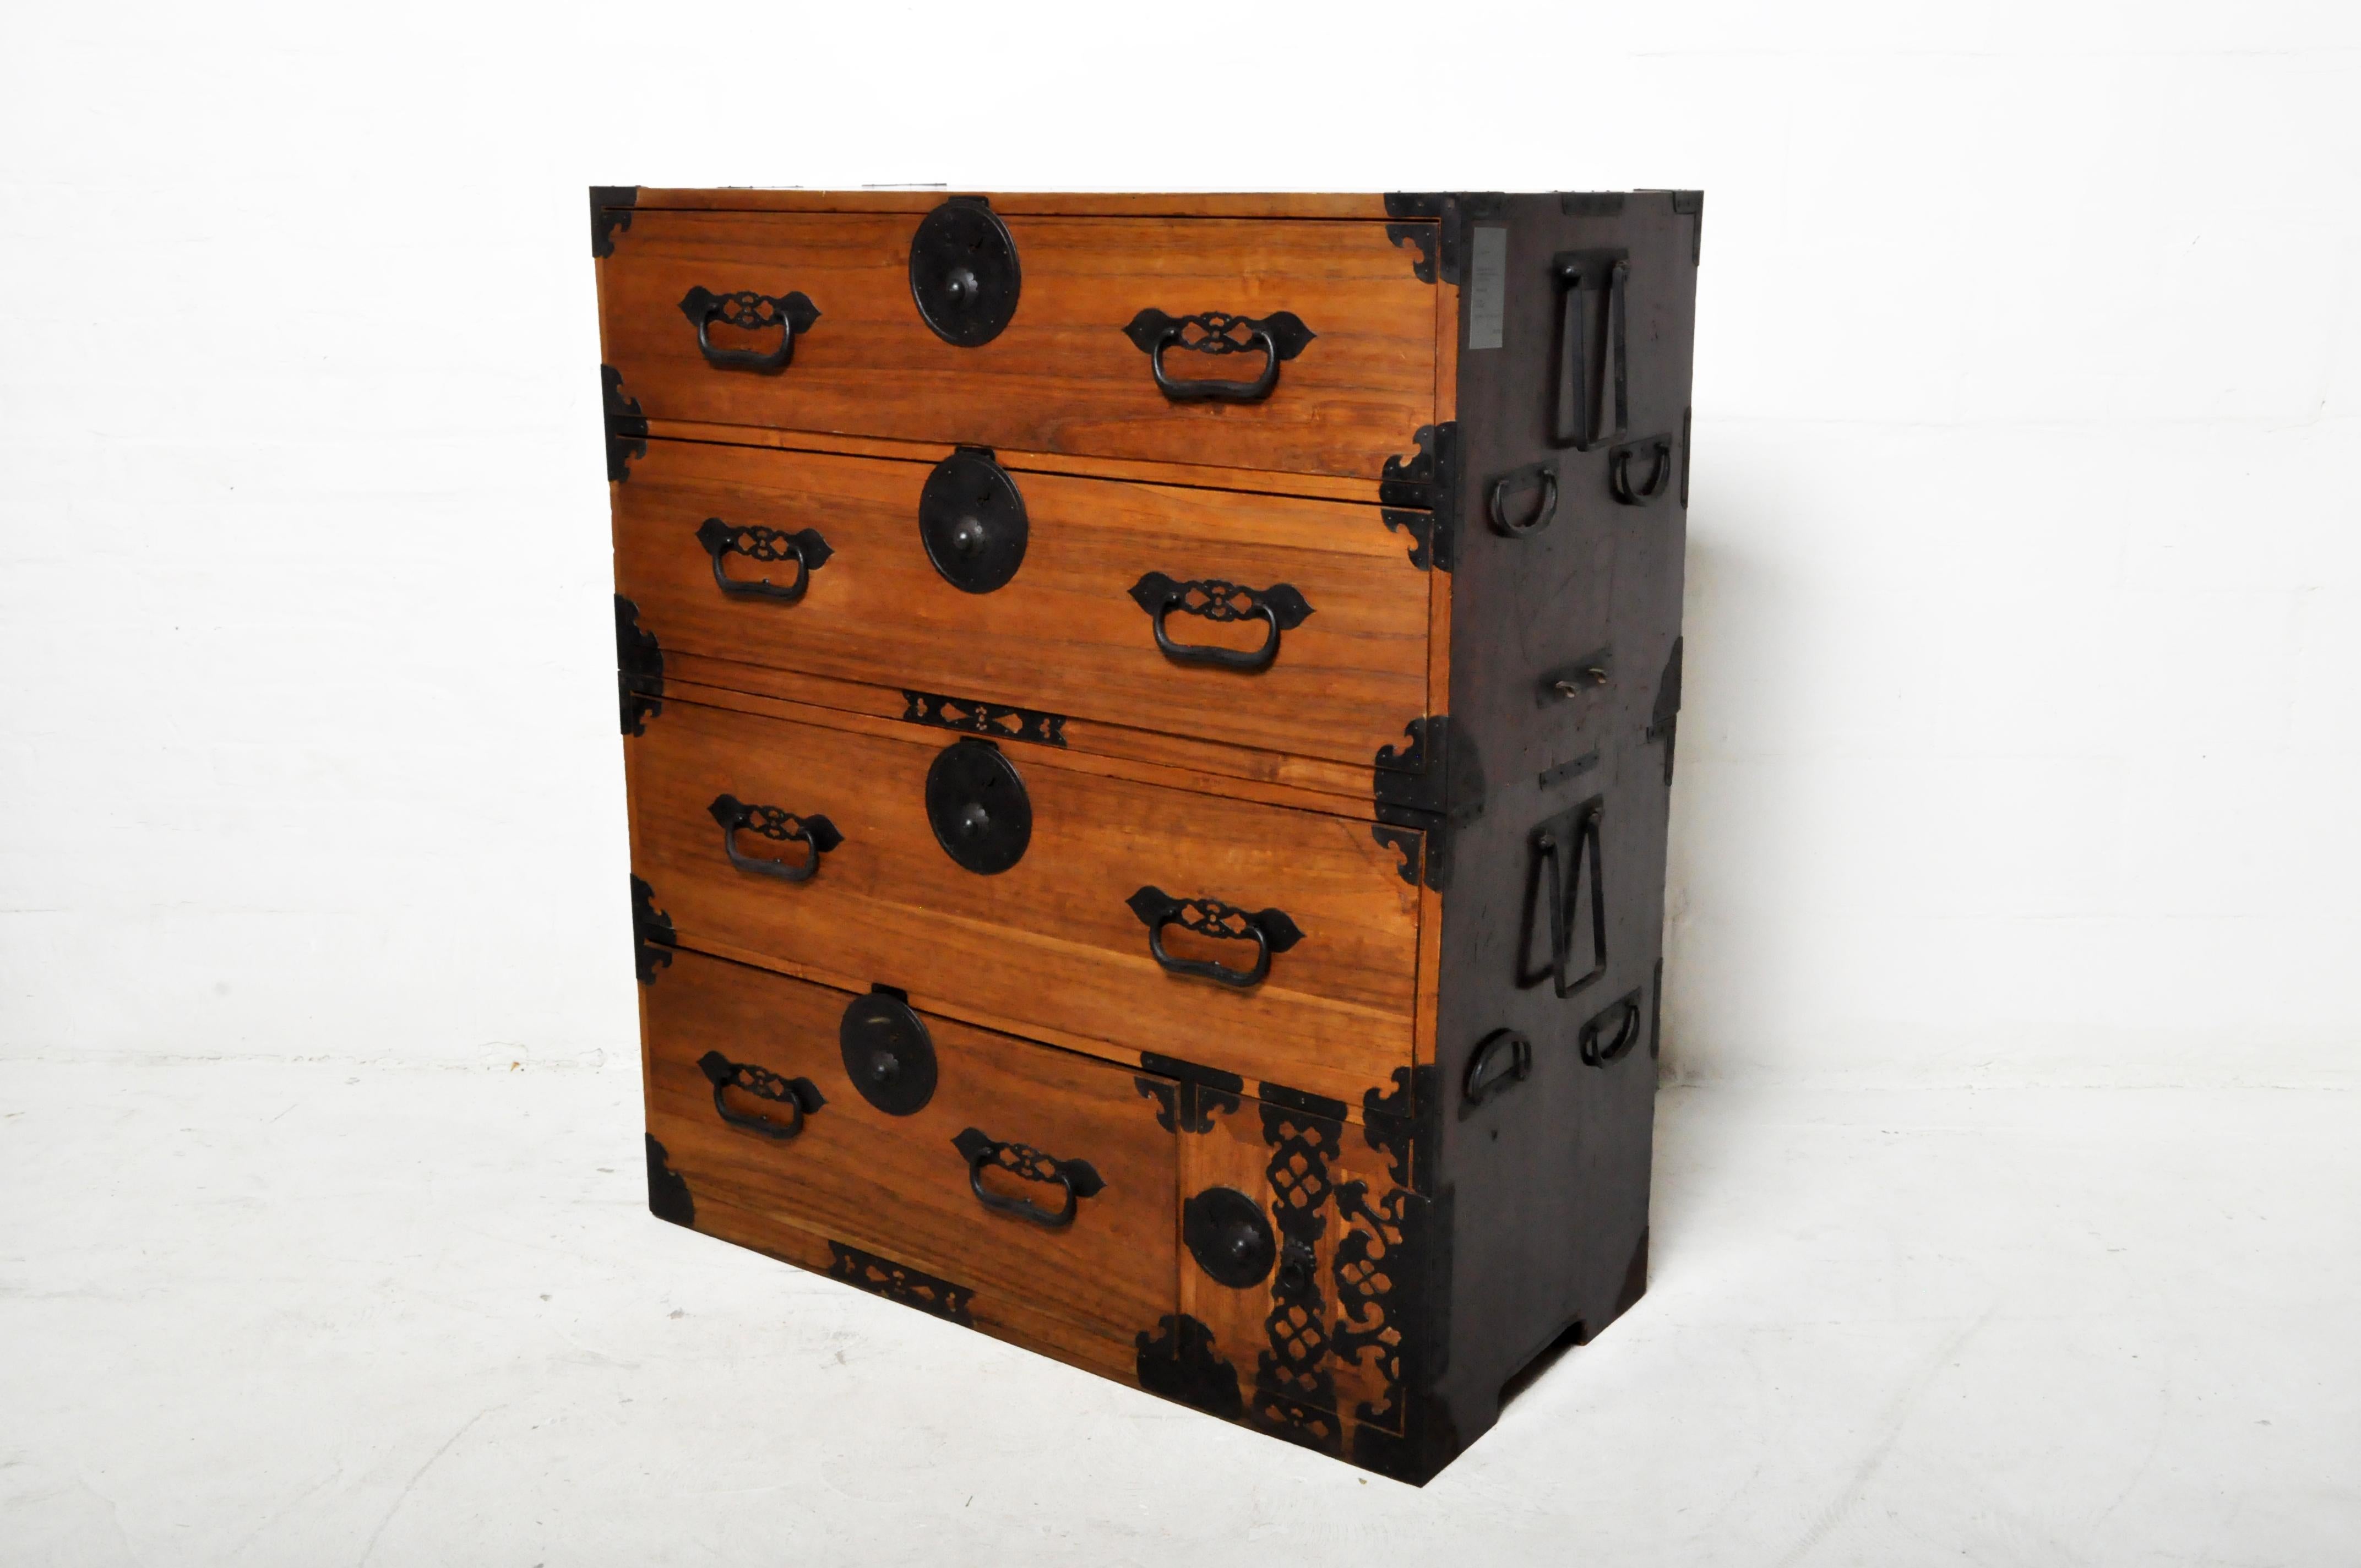 Crafted in Japan during the 20th century, this Kiri wood tansu chest is a fine example of Japan's traditional mobile cabinetry. The long side handles flip up to permit a pole to be inserted so the chest can be carried by two people. This portability